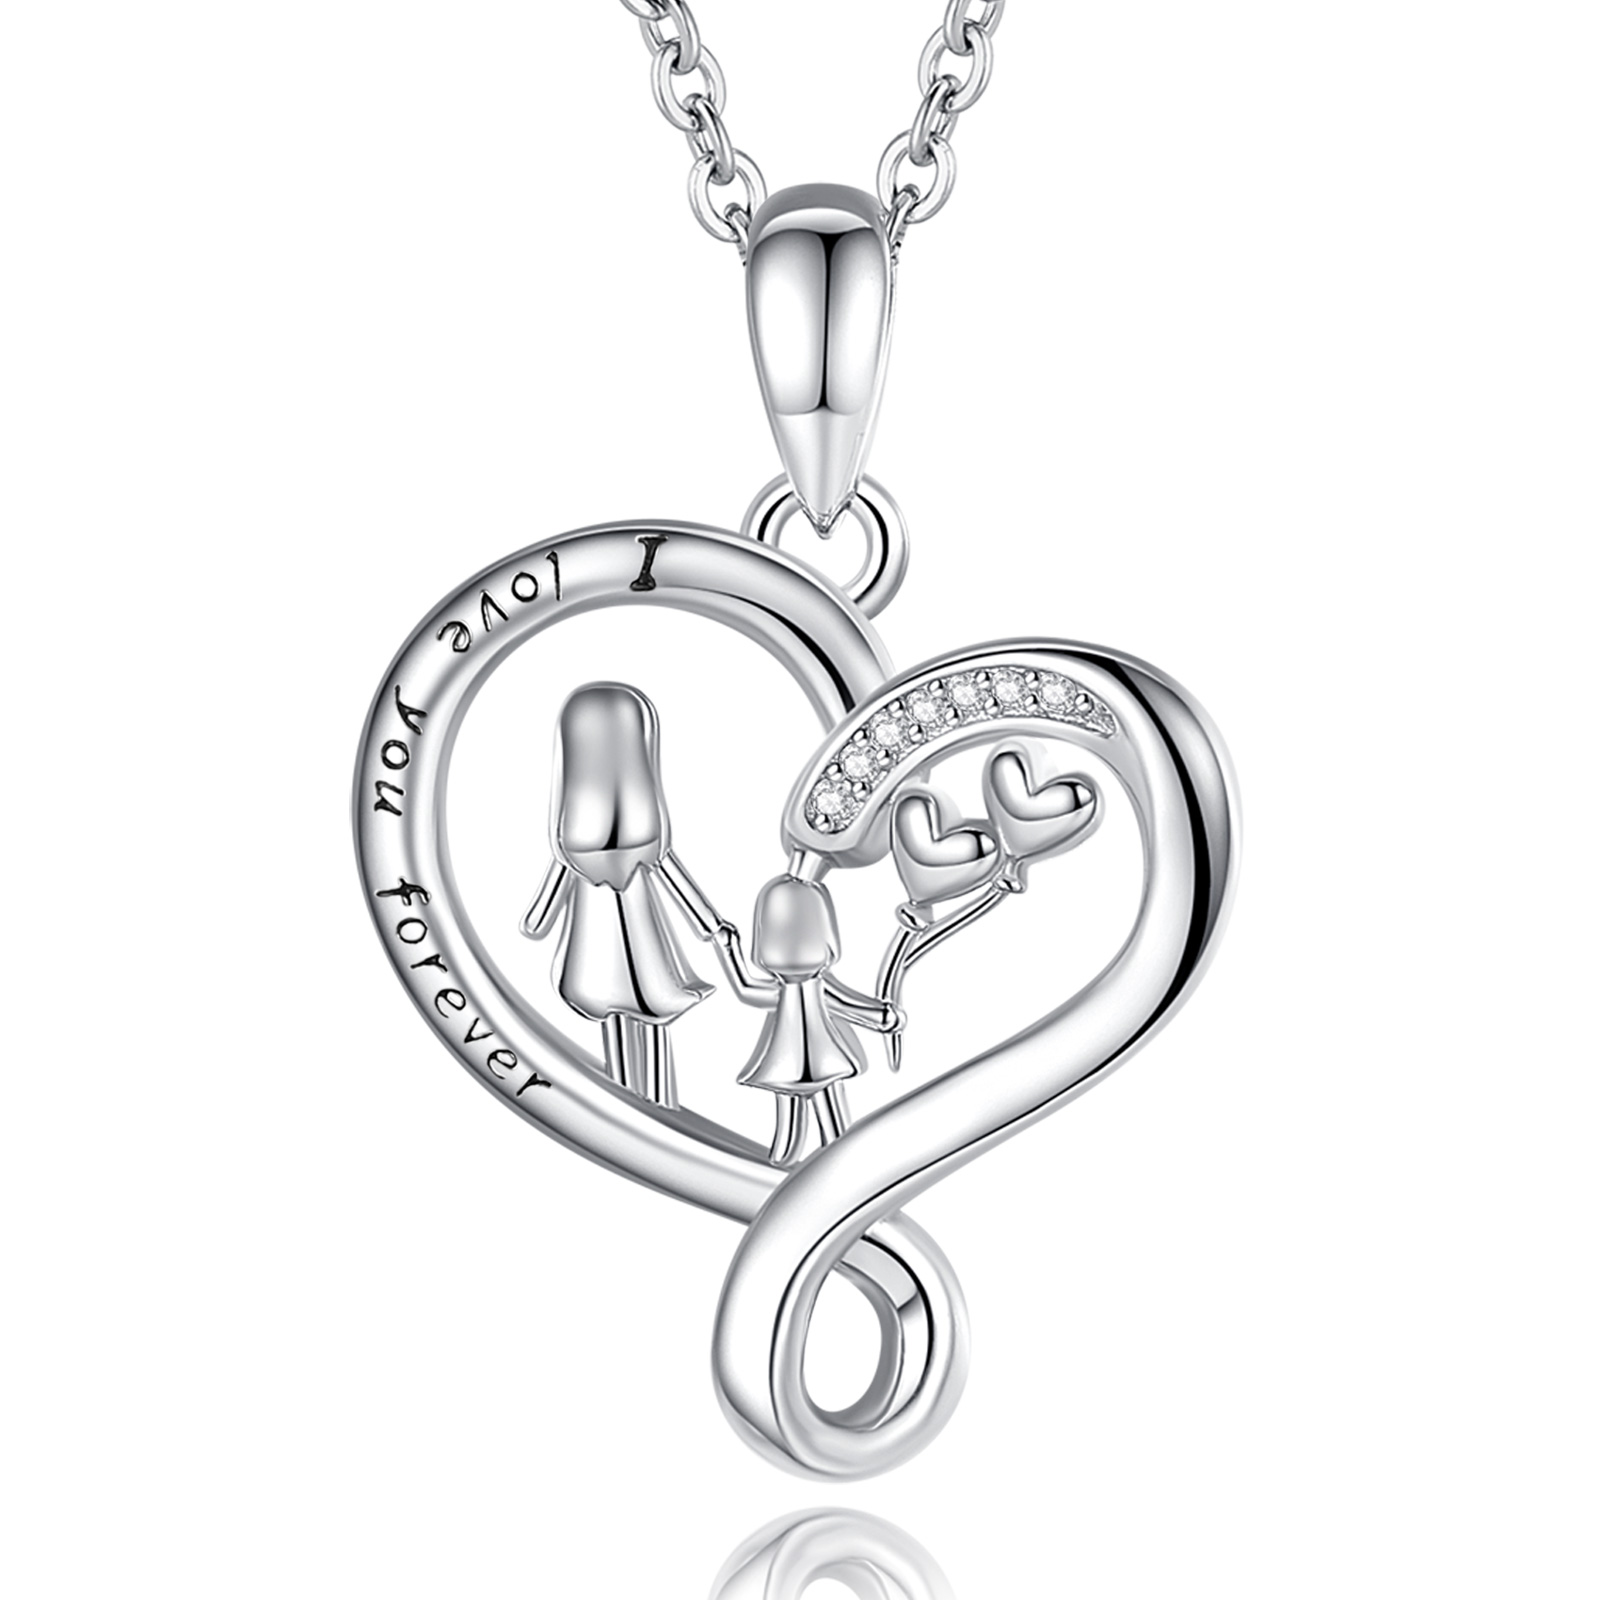 Merryshine Jewelry Latest Trendy S925 Sterling Silver Mother and Daughter Heart Necklace